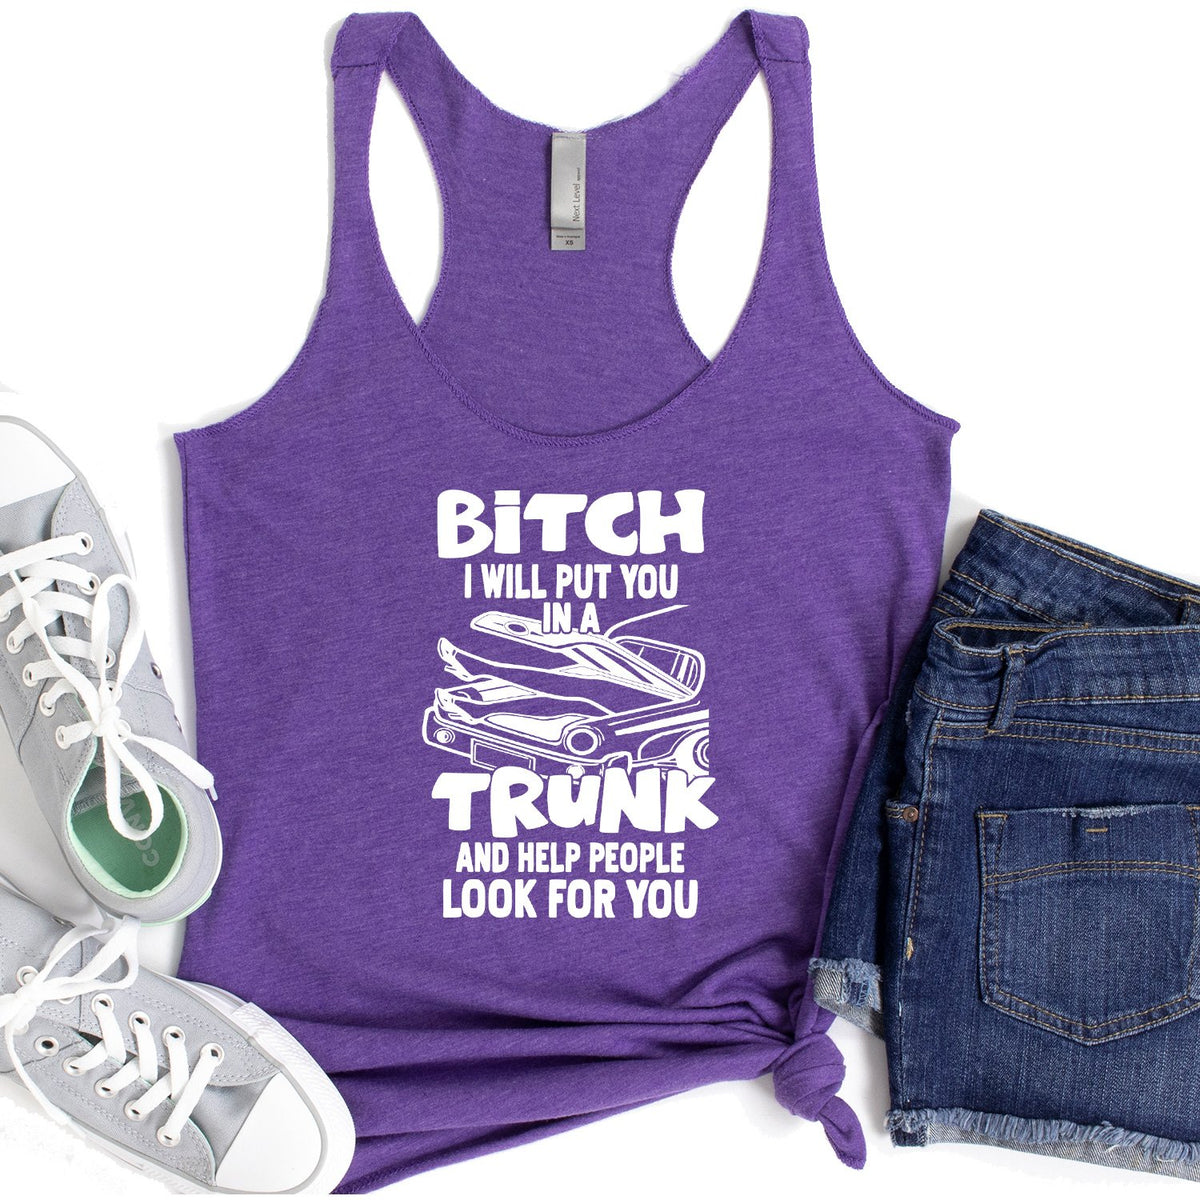 Bitch I Will Put You in A Trunk and Help People Look For You - Tank Top Racerback